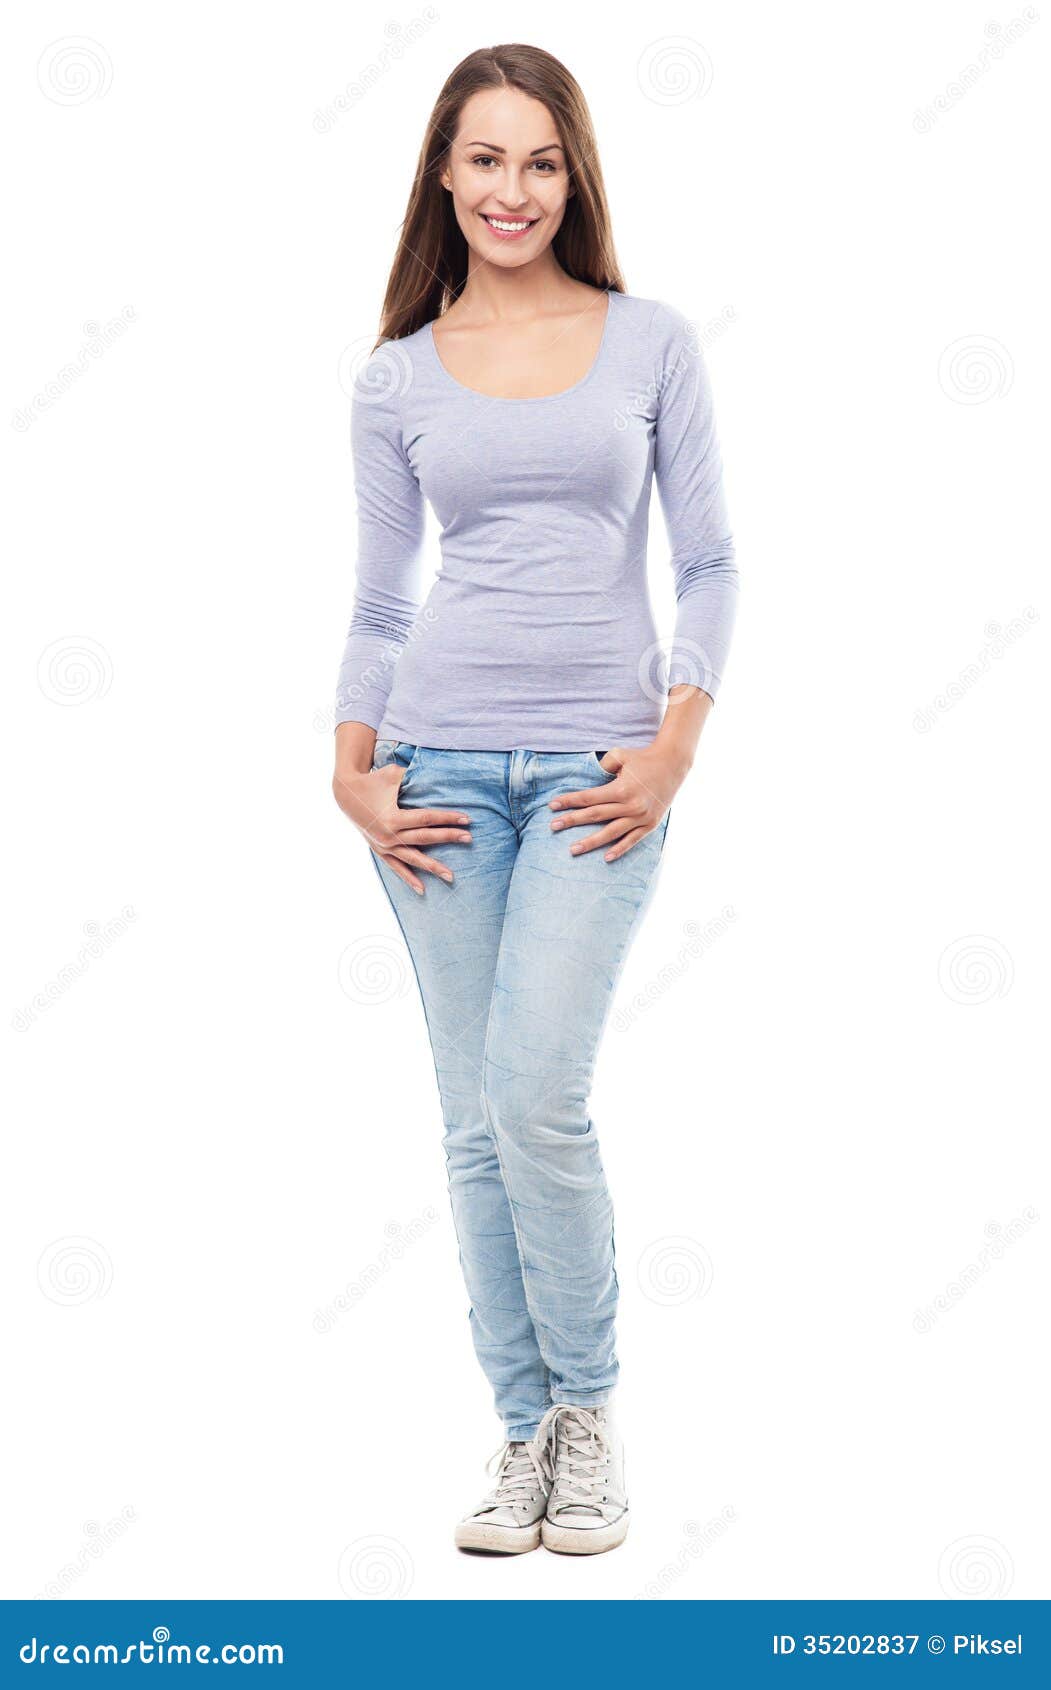 Attractive Young Woman Standing Stock Image - Image of enjoying, full ...